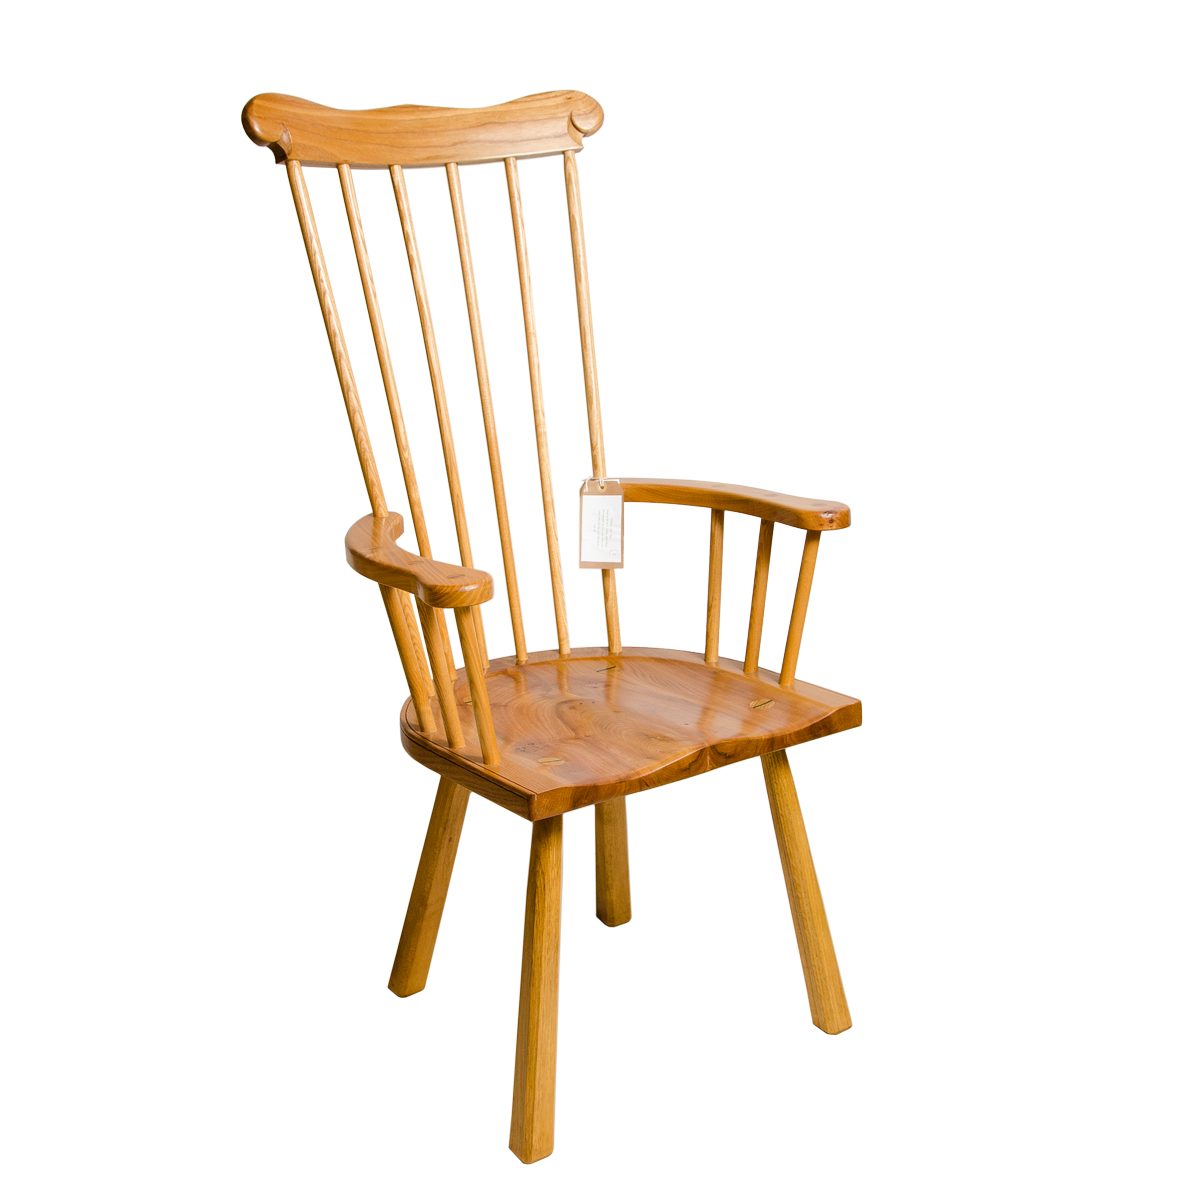 Curule Chair Download Free Transparent Image HQ PNG Image